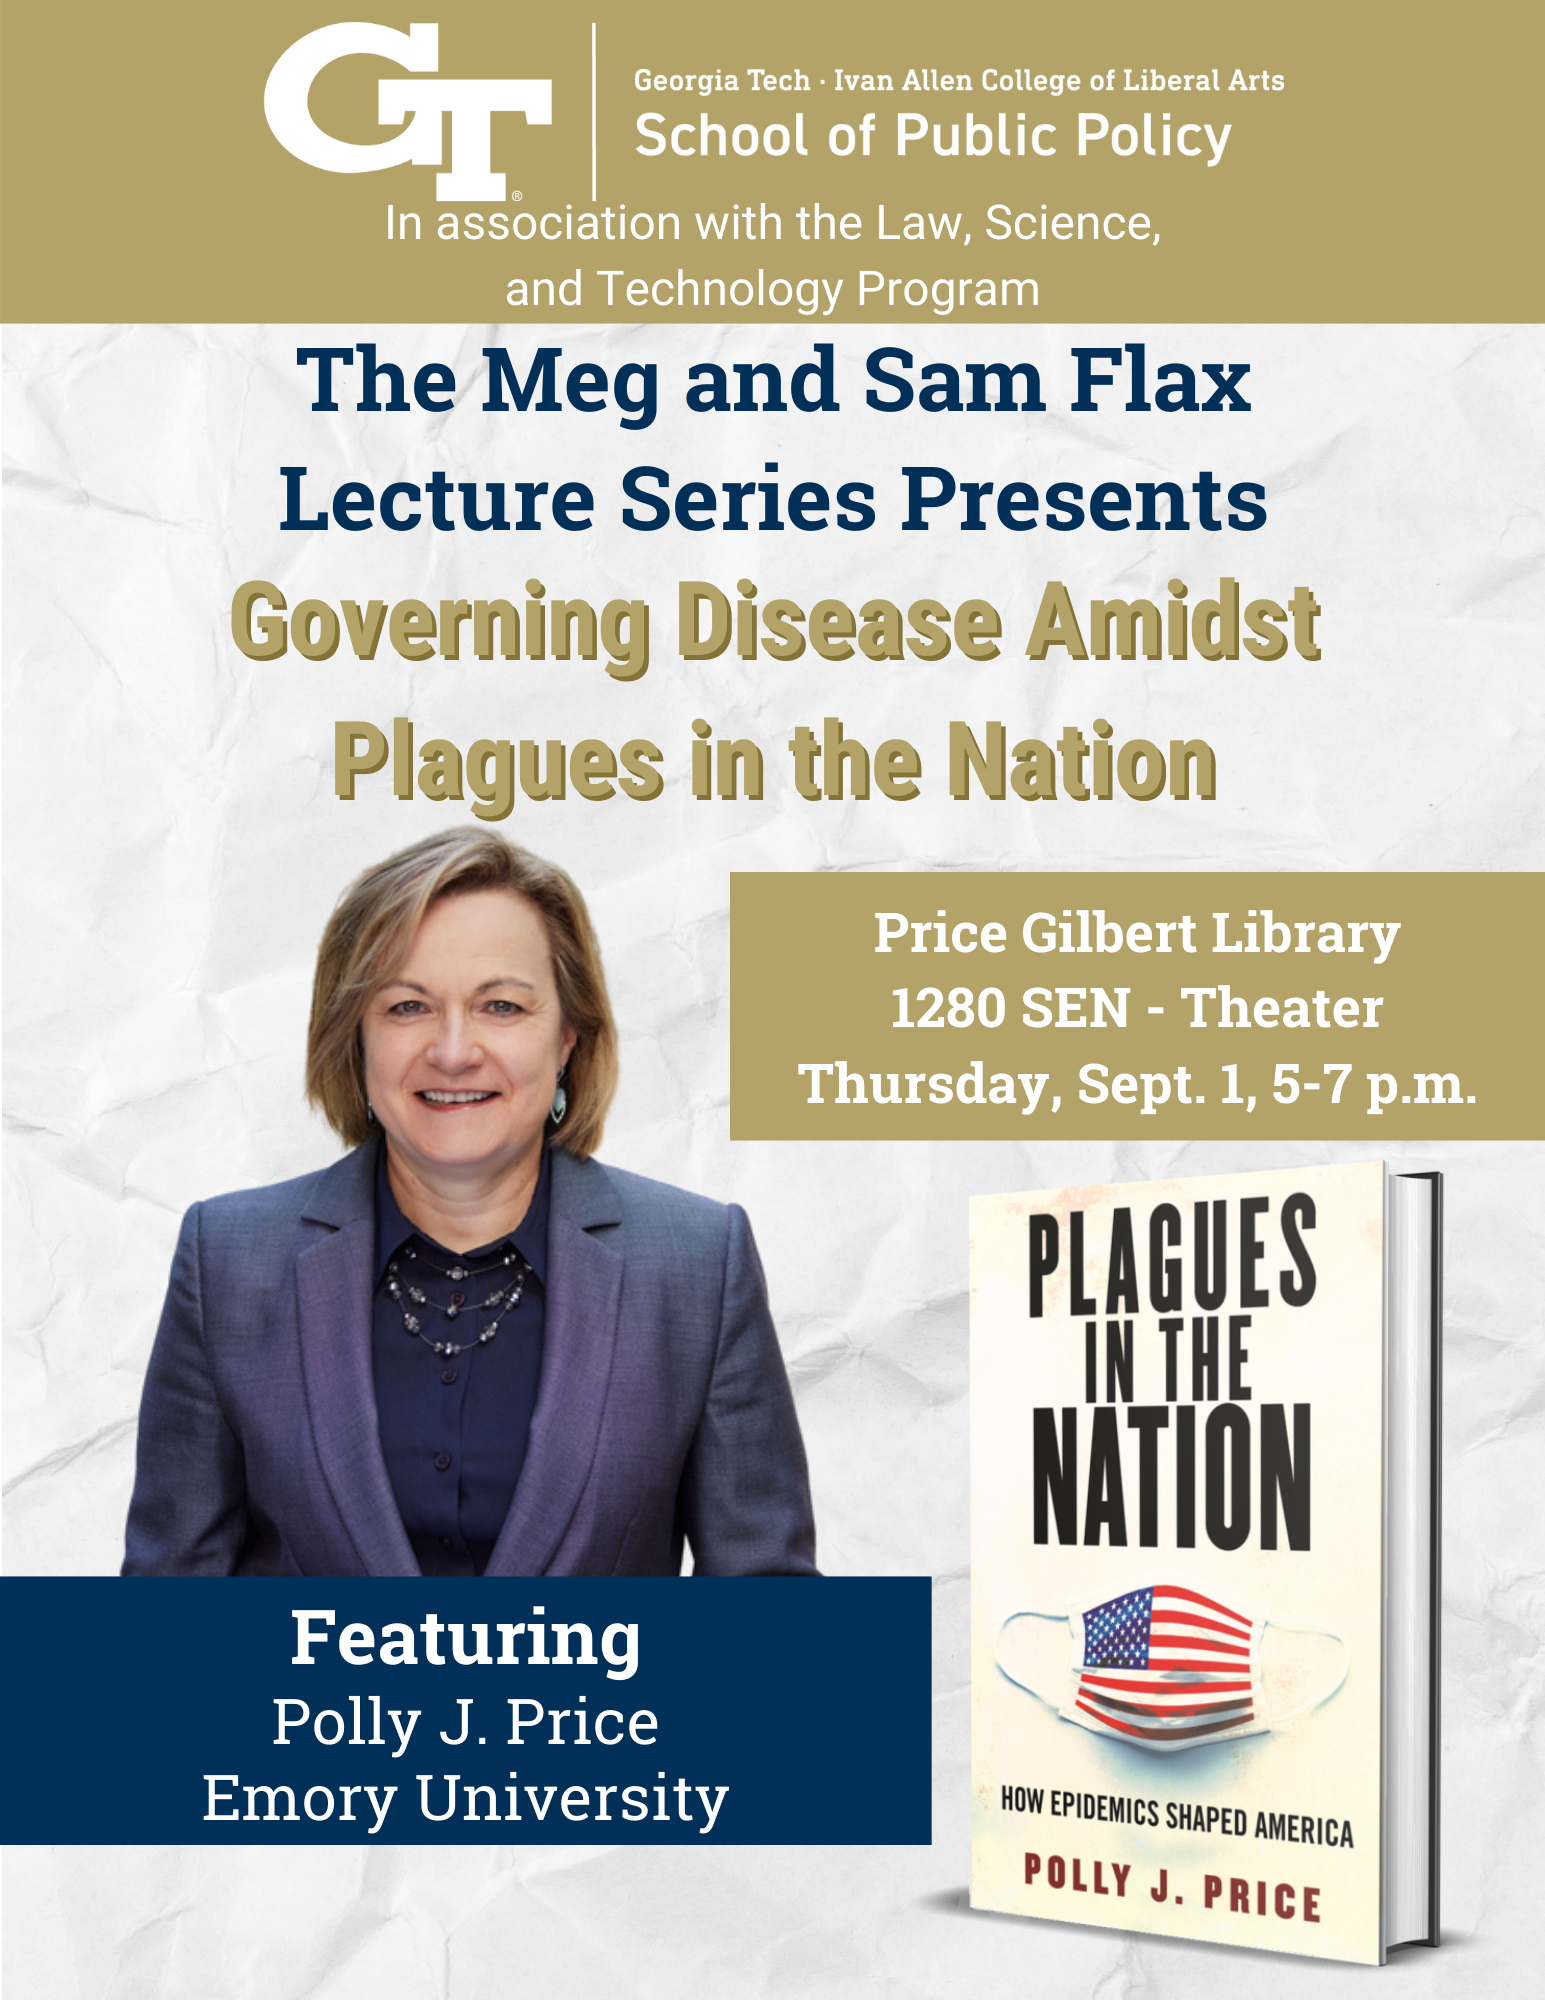 A flyer for the Flax Lecture